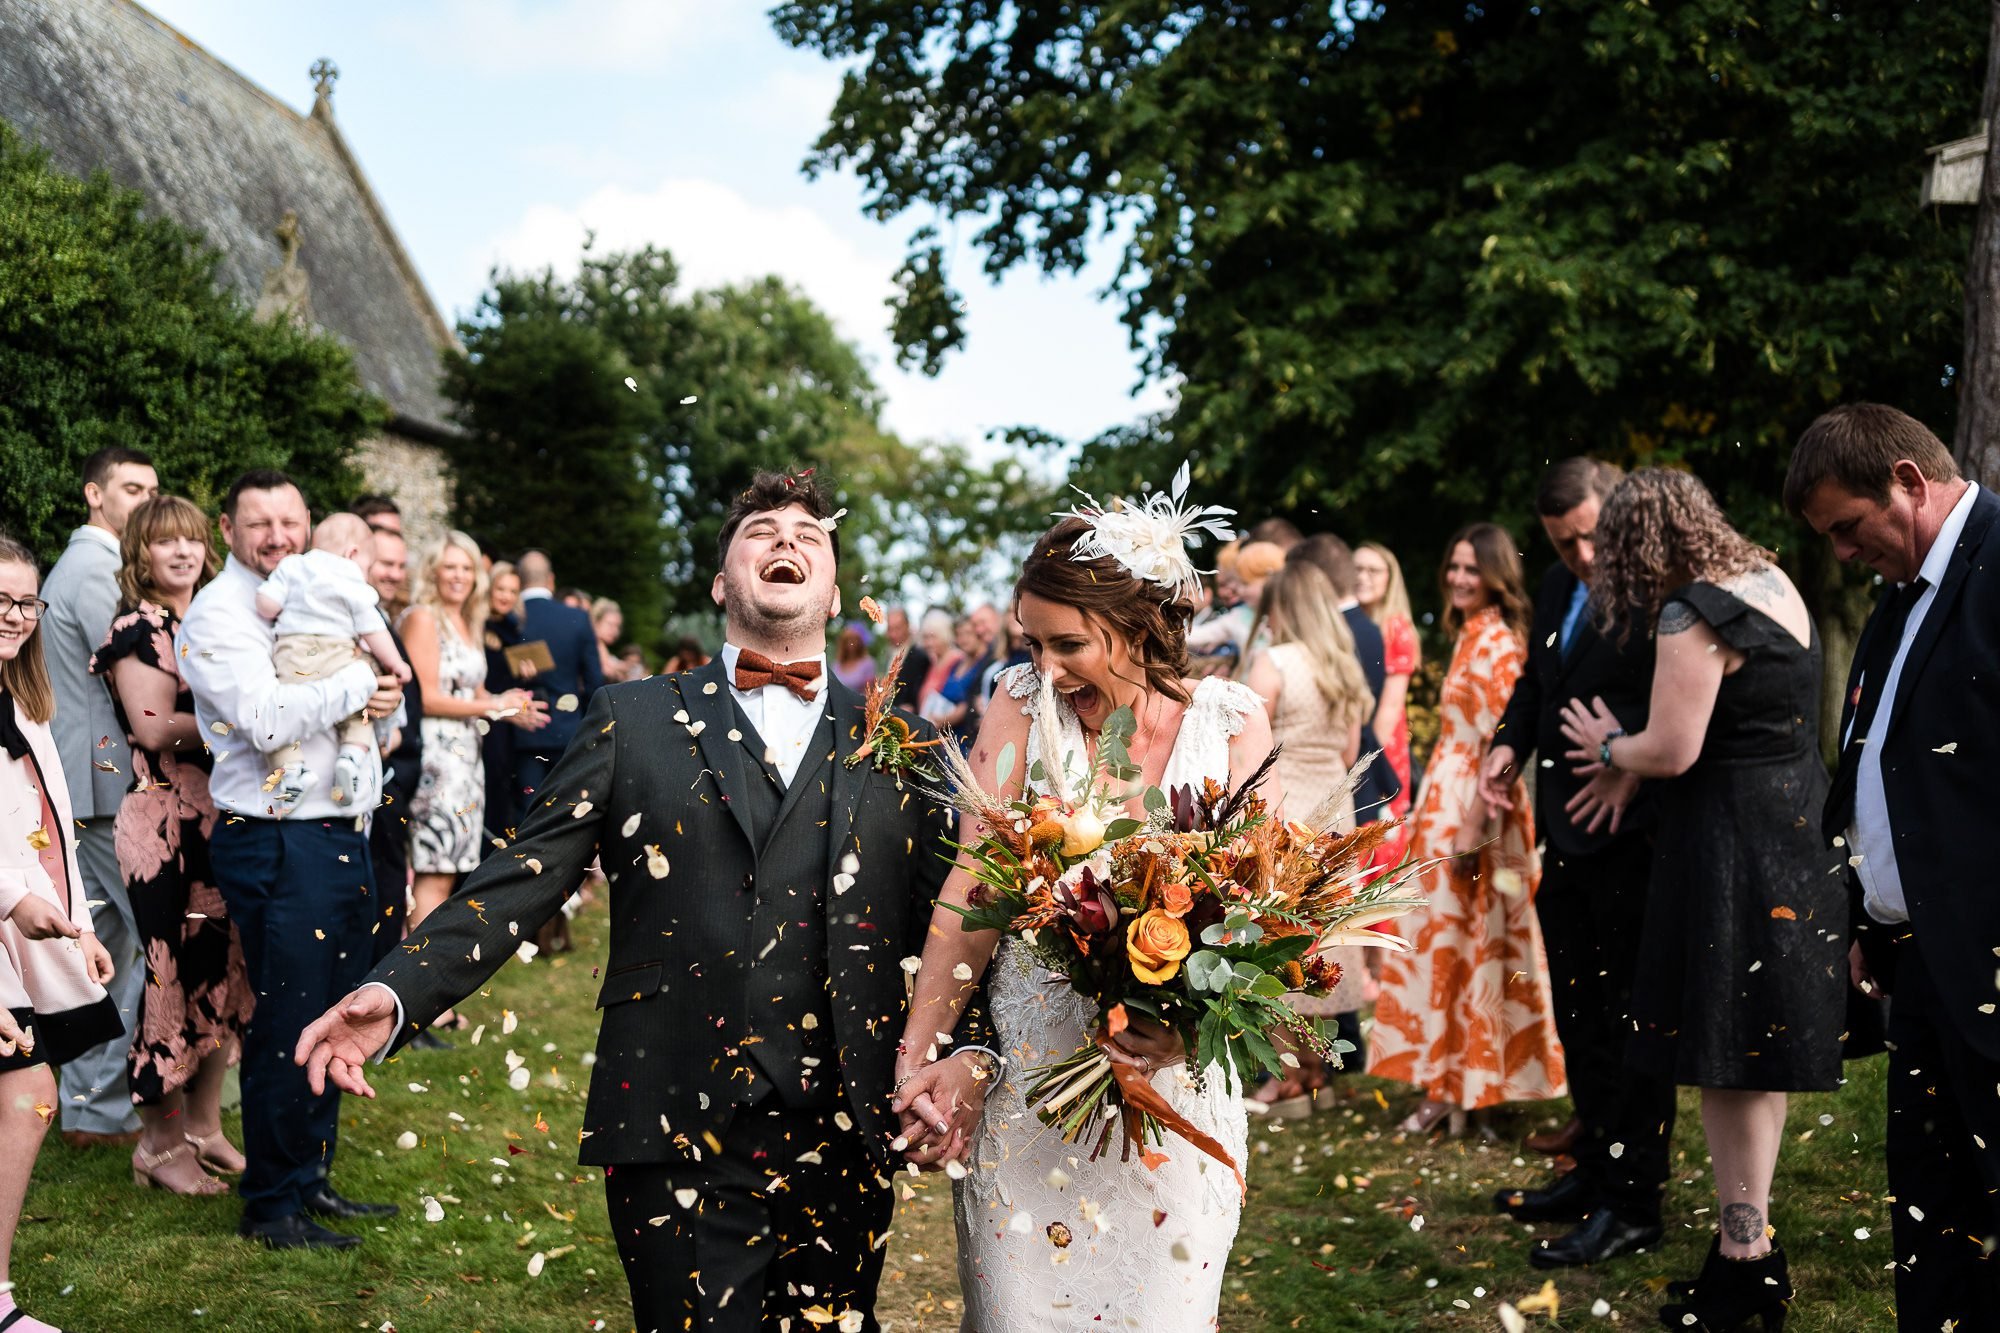 A Bride and Groom laugh and smile as they walk down a confetti line outside the church. They are covered in dried petals which are also in the air